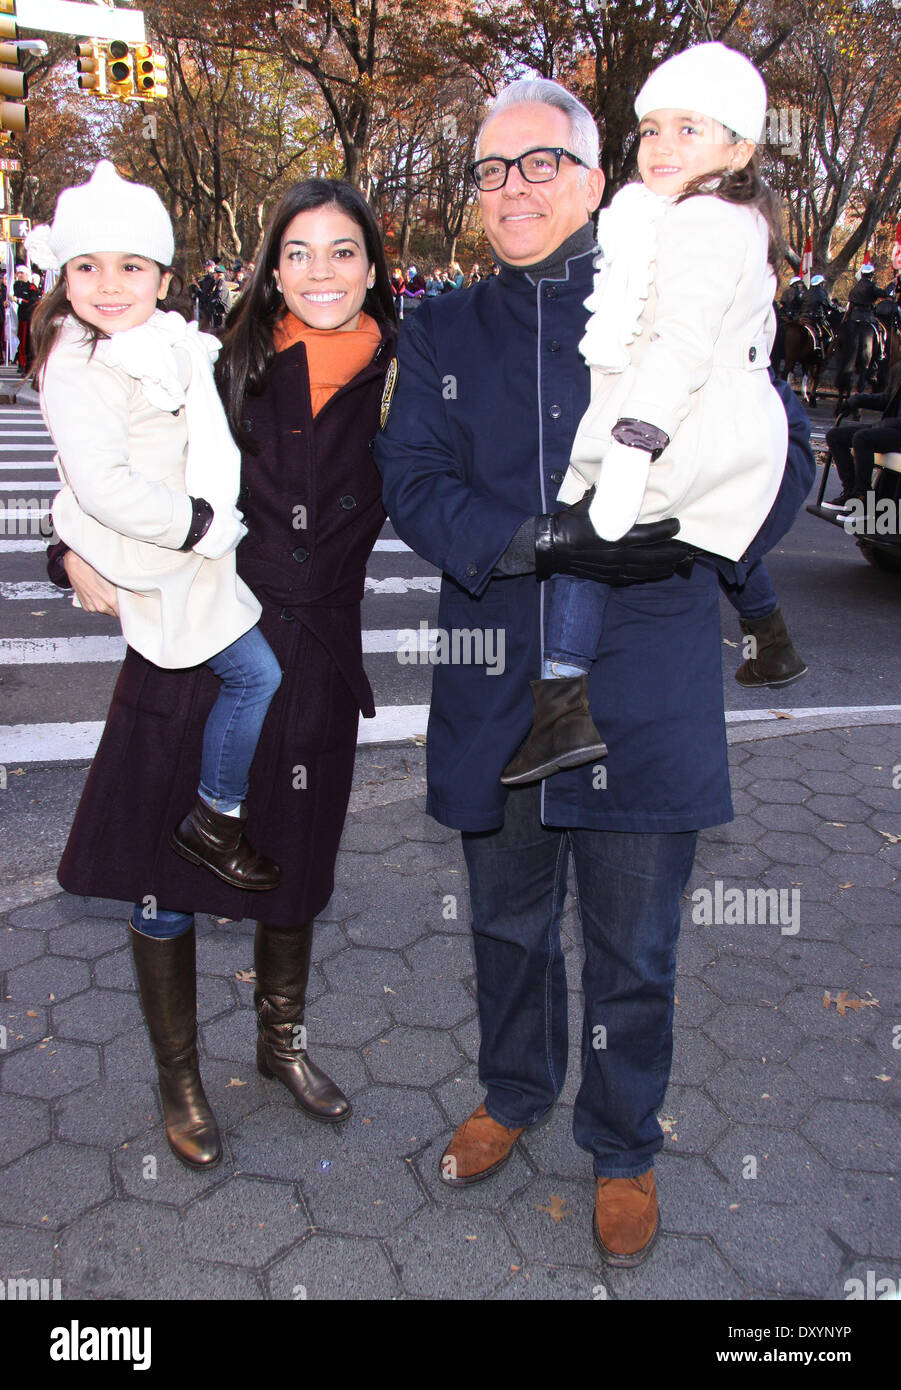 86th Annual Macy's Thanksgiving Day Parade Featuring: Margaret Anne Williams,Geoffrey Zakarian,family Where: New York City USA When: 22 Nov 2012 Stock Photo